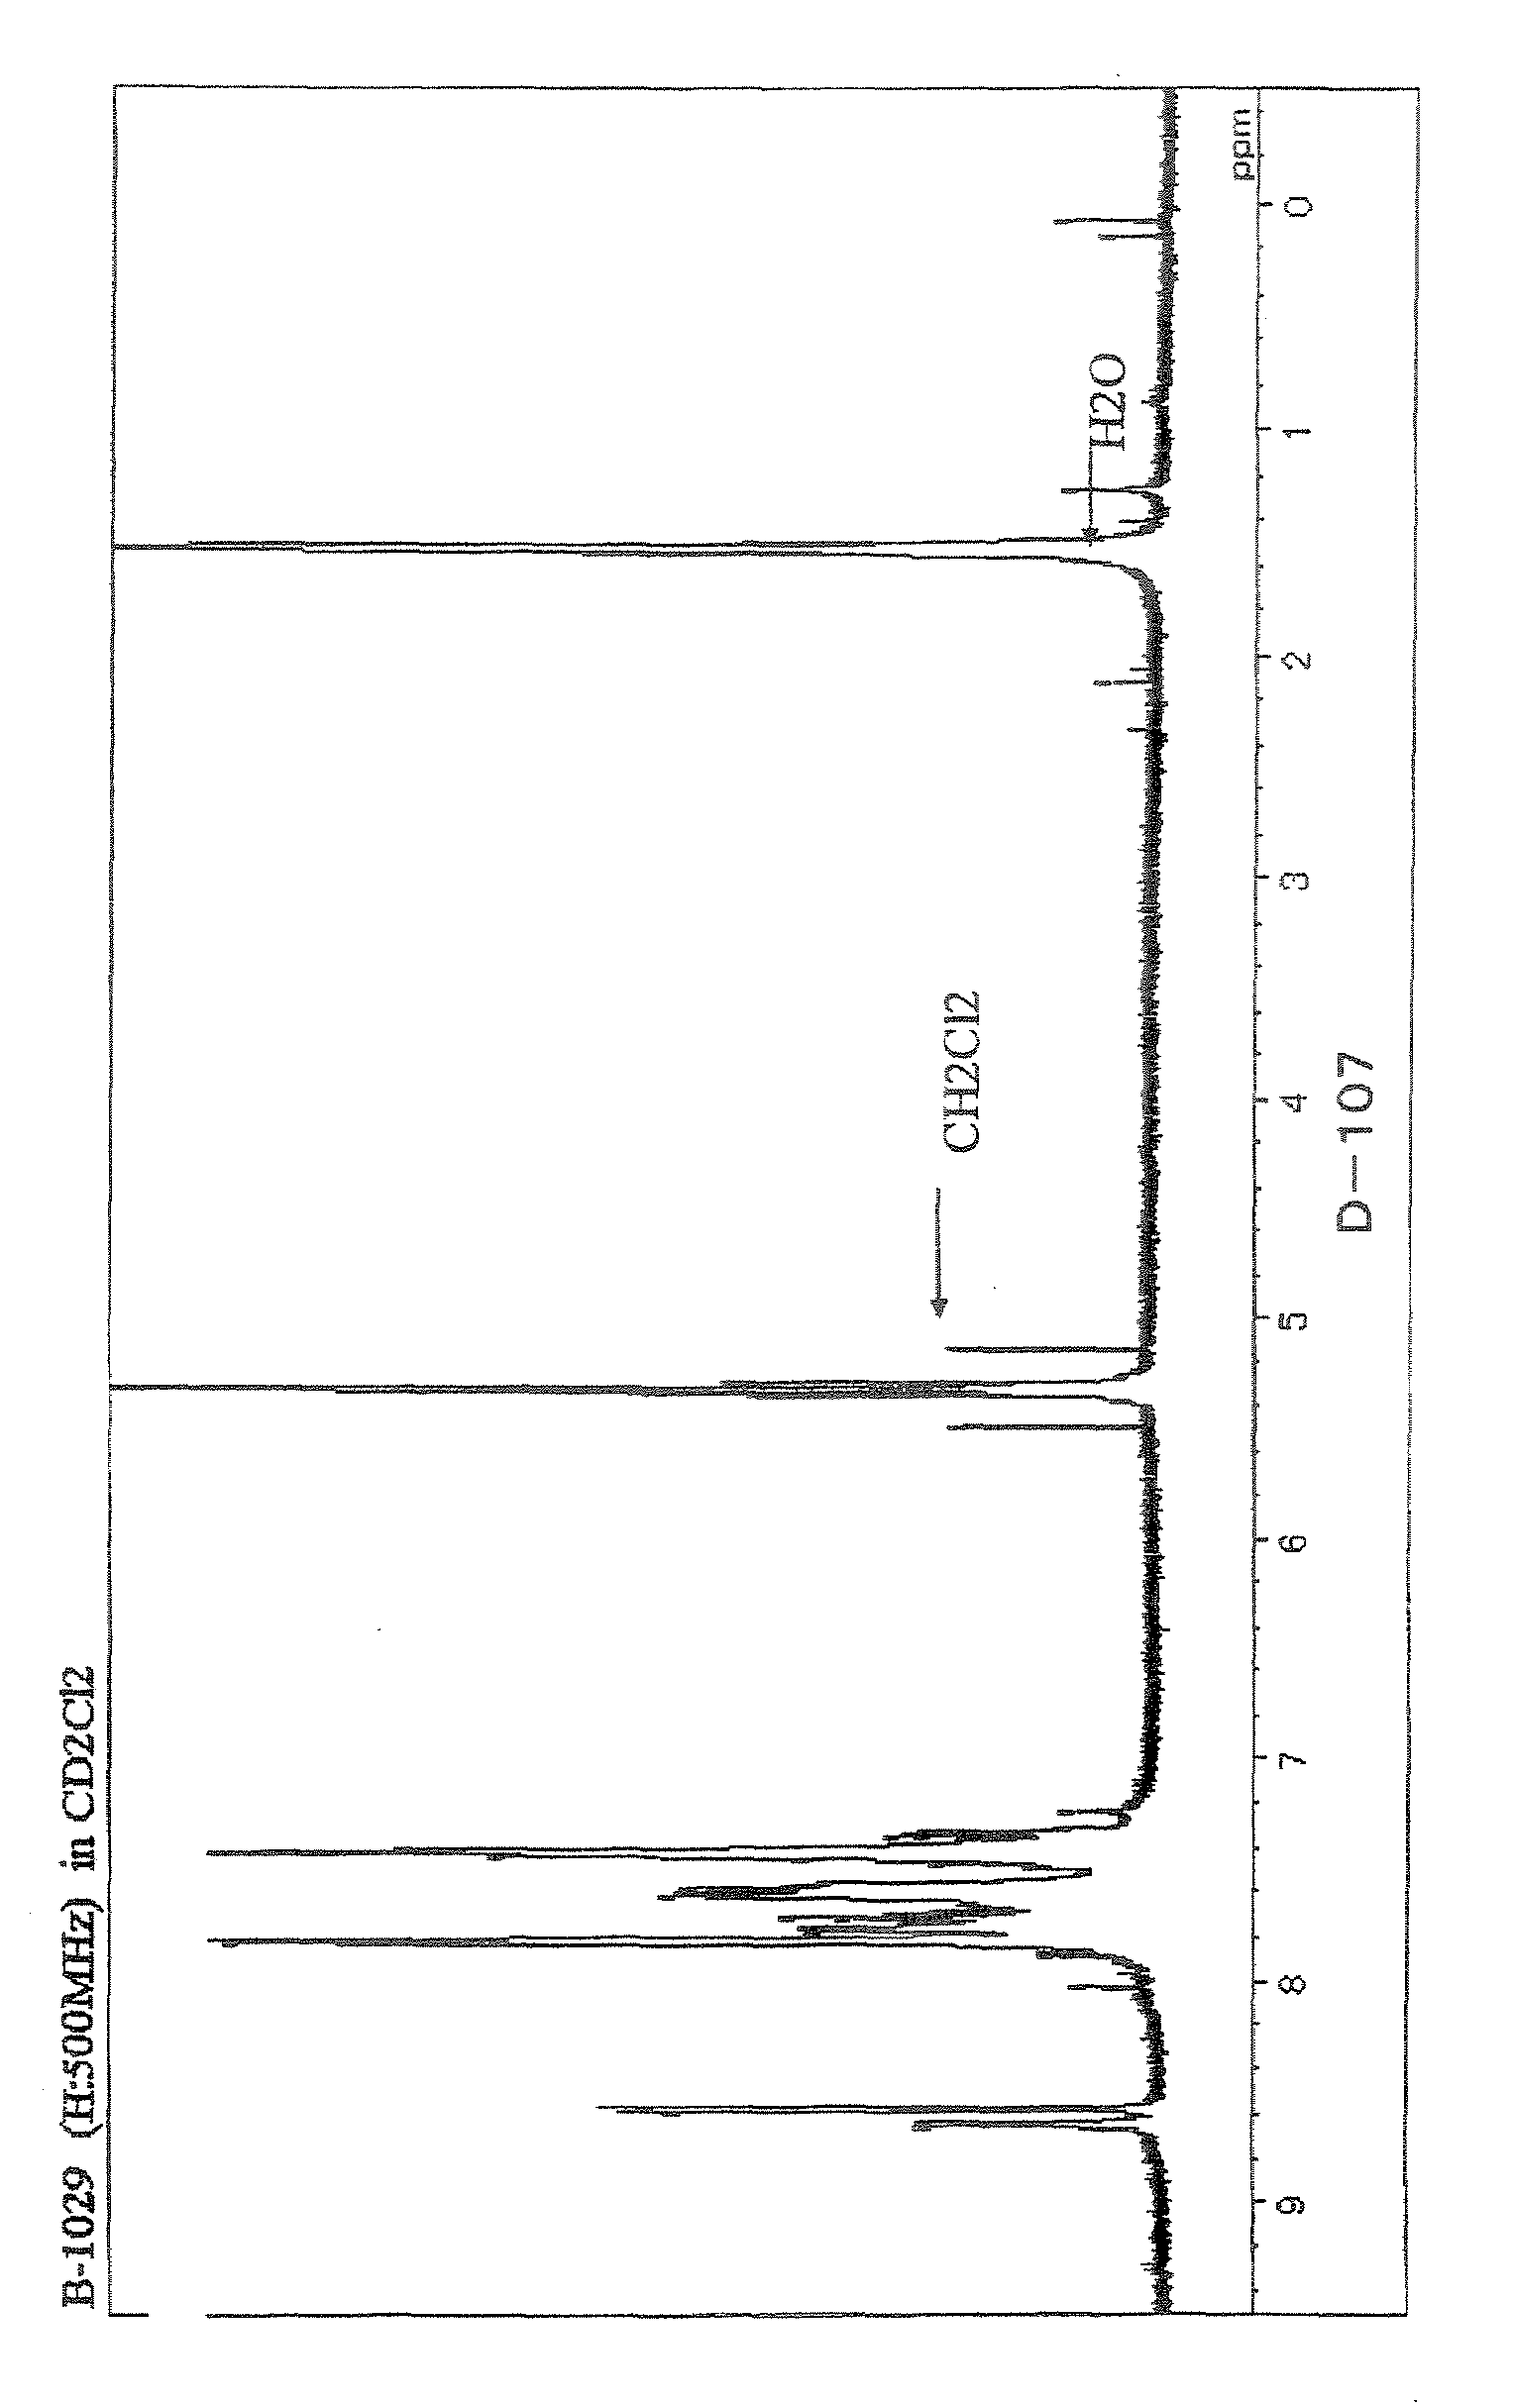 Aromatic amine derivative and organic electroluminescence device using the same